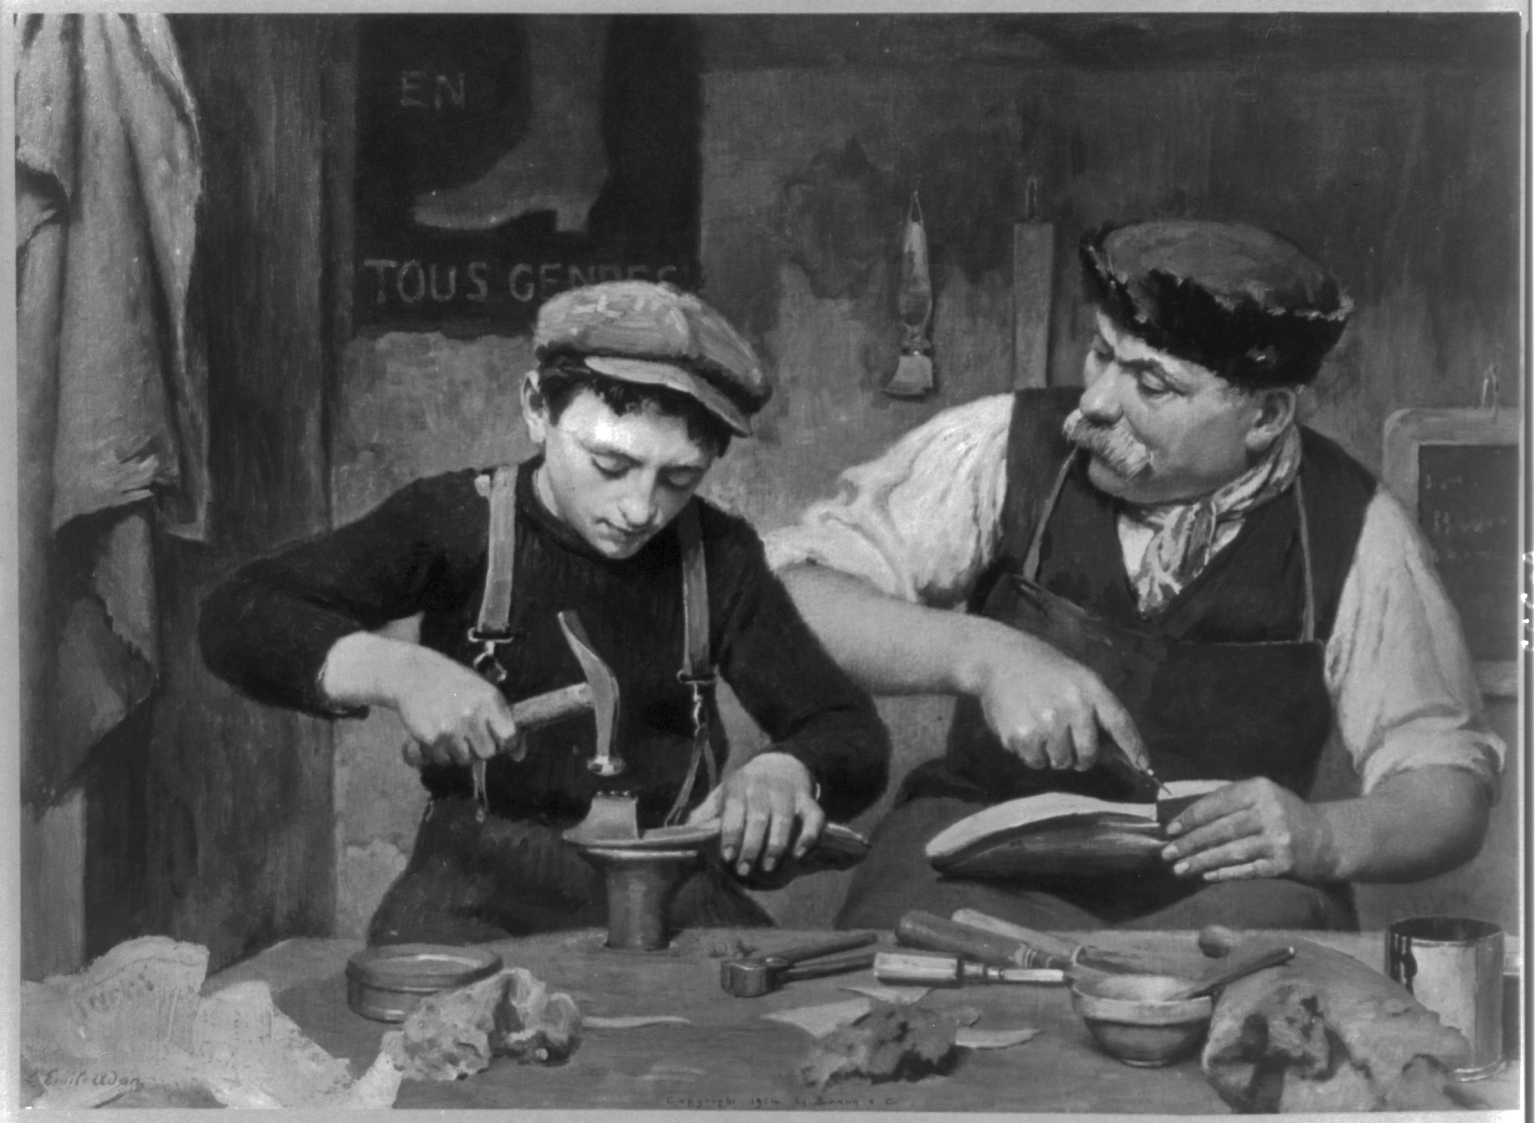 Black and white of French Cobbler's Apprentice in the 19th Century with his master